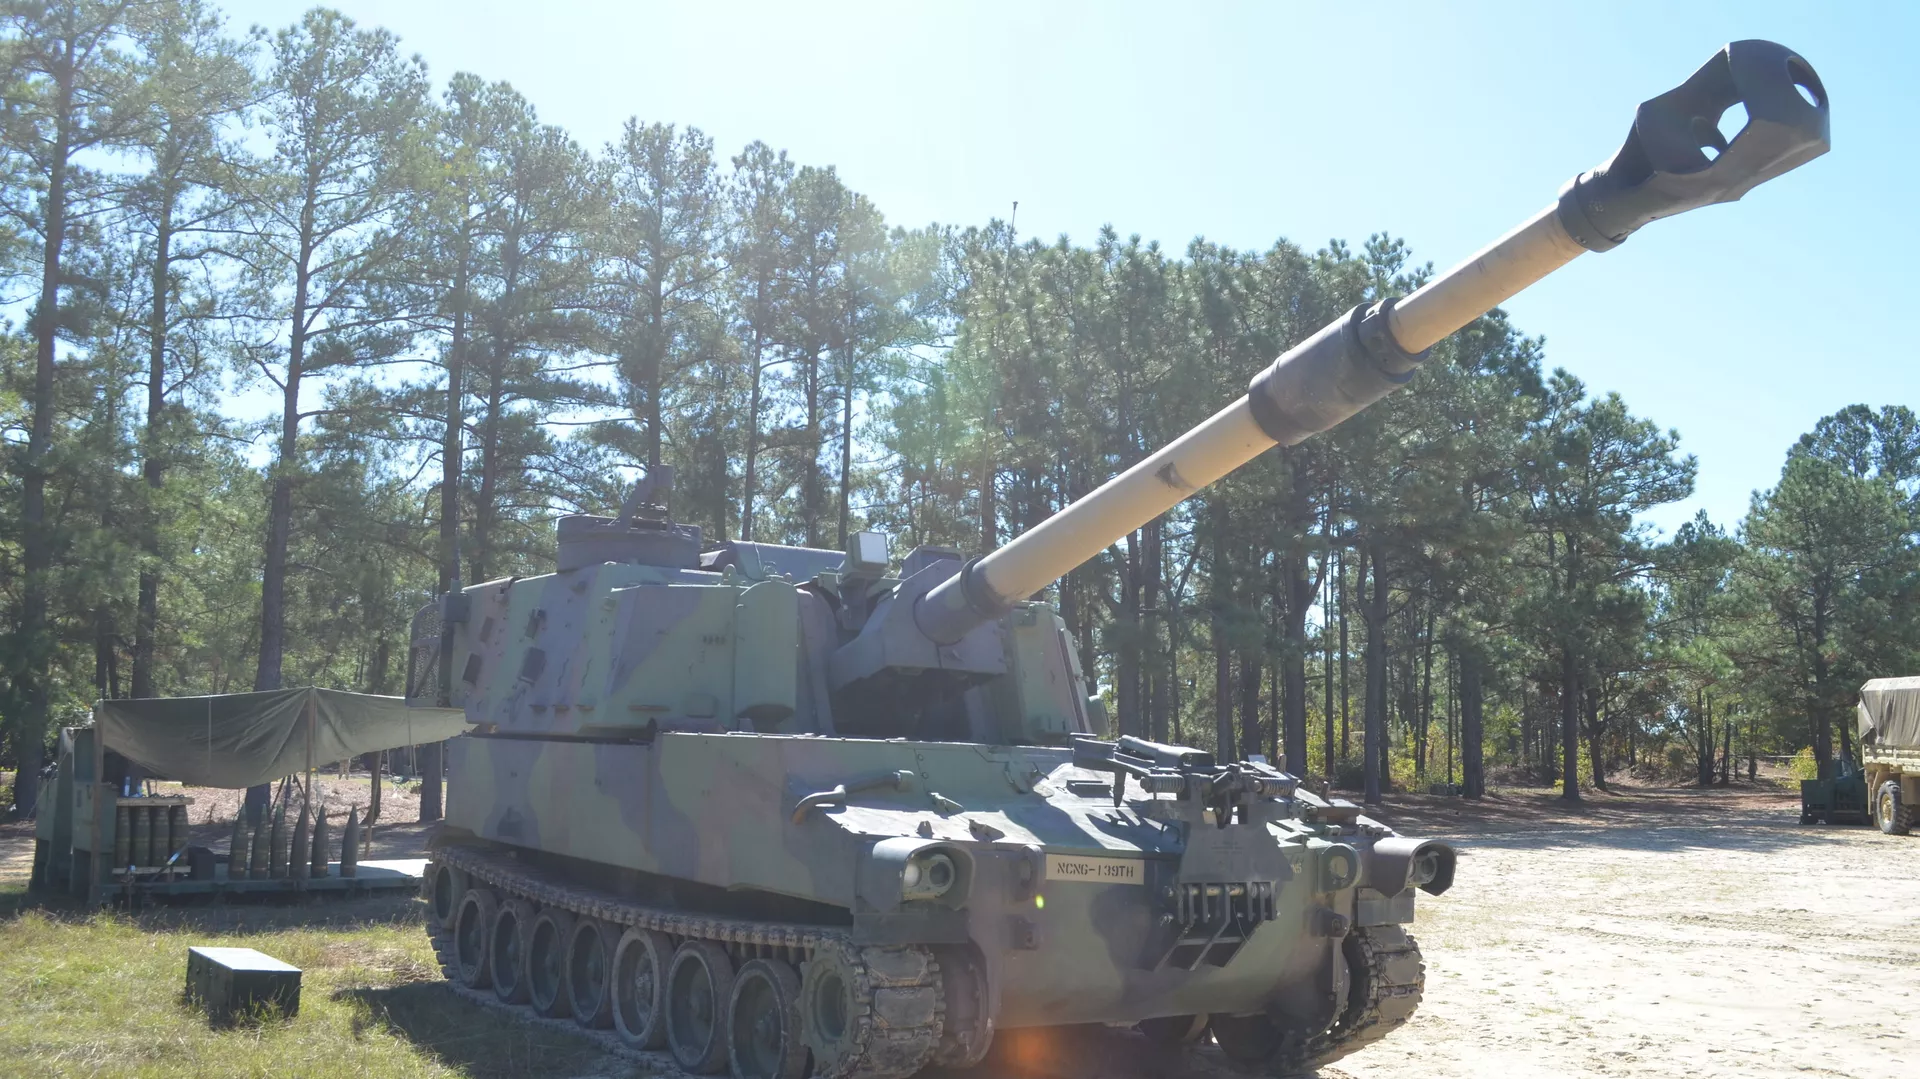 The M109 Paladin Self-Propelled Howitzer standing ready deep in the southern training areas at Fort Bragg. Nine National Guard troops from North and South Carolina, Florida, Georgia, Mississippi, Illinois and New Jersey are attending the 13 Bravo artillery military occupational specialty (MOS) reclassification course and will learn how to be a crew member on the three main “cannon” artillery weapons systems in the U.S. Army: The M119A3 105mm light towed howitzer, M777A2 155mm medium towed howitzer and the M109A6 Paladin 155mm self-propelled howitzer. Over the course of two days in the field, students will fire hundreds of rounds from all three weapons. - Sputnik International, 1920, 16.04.2023